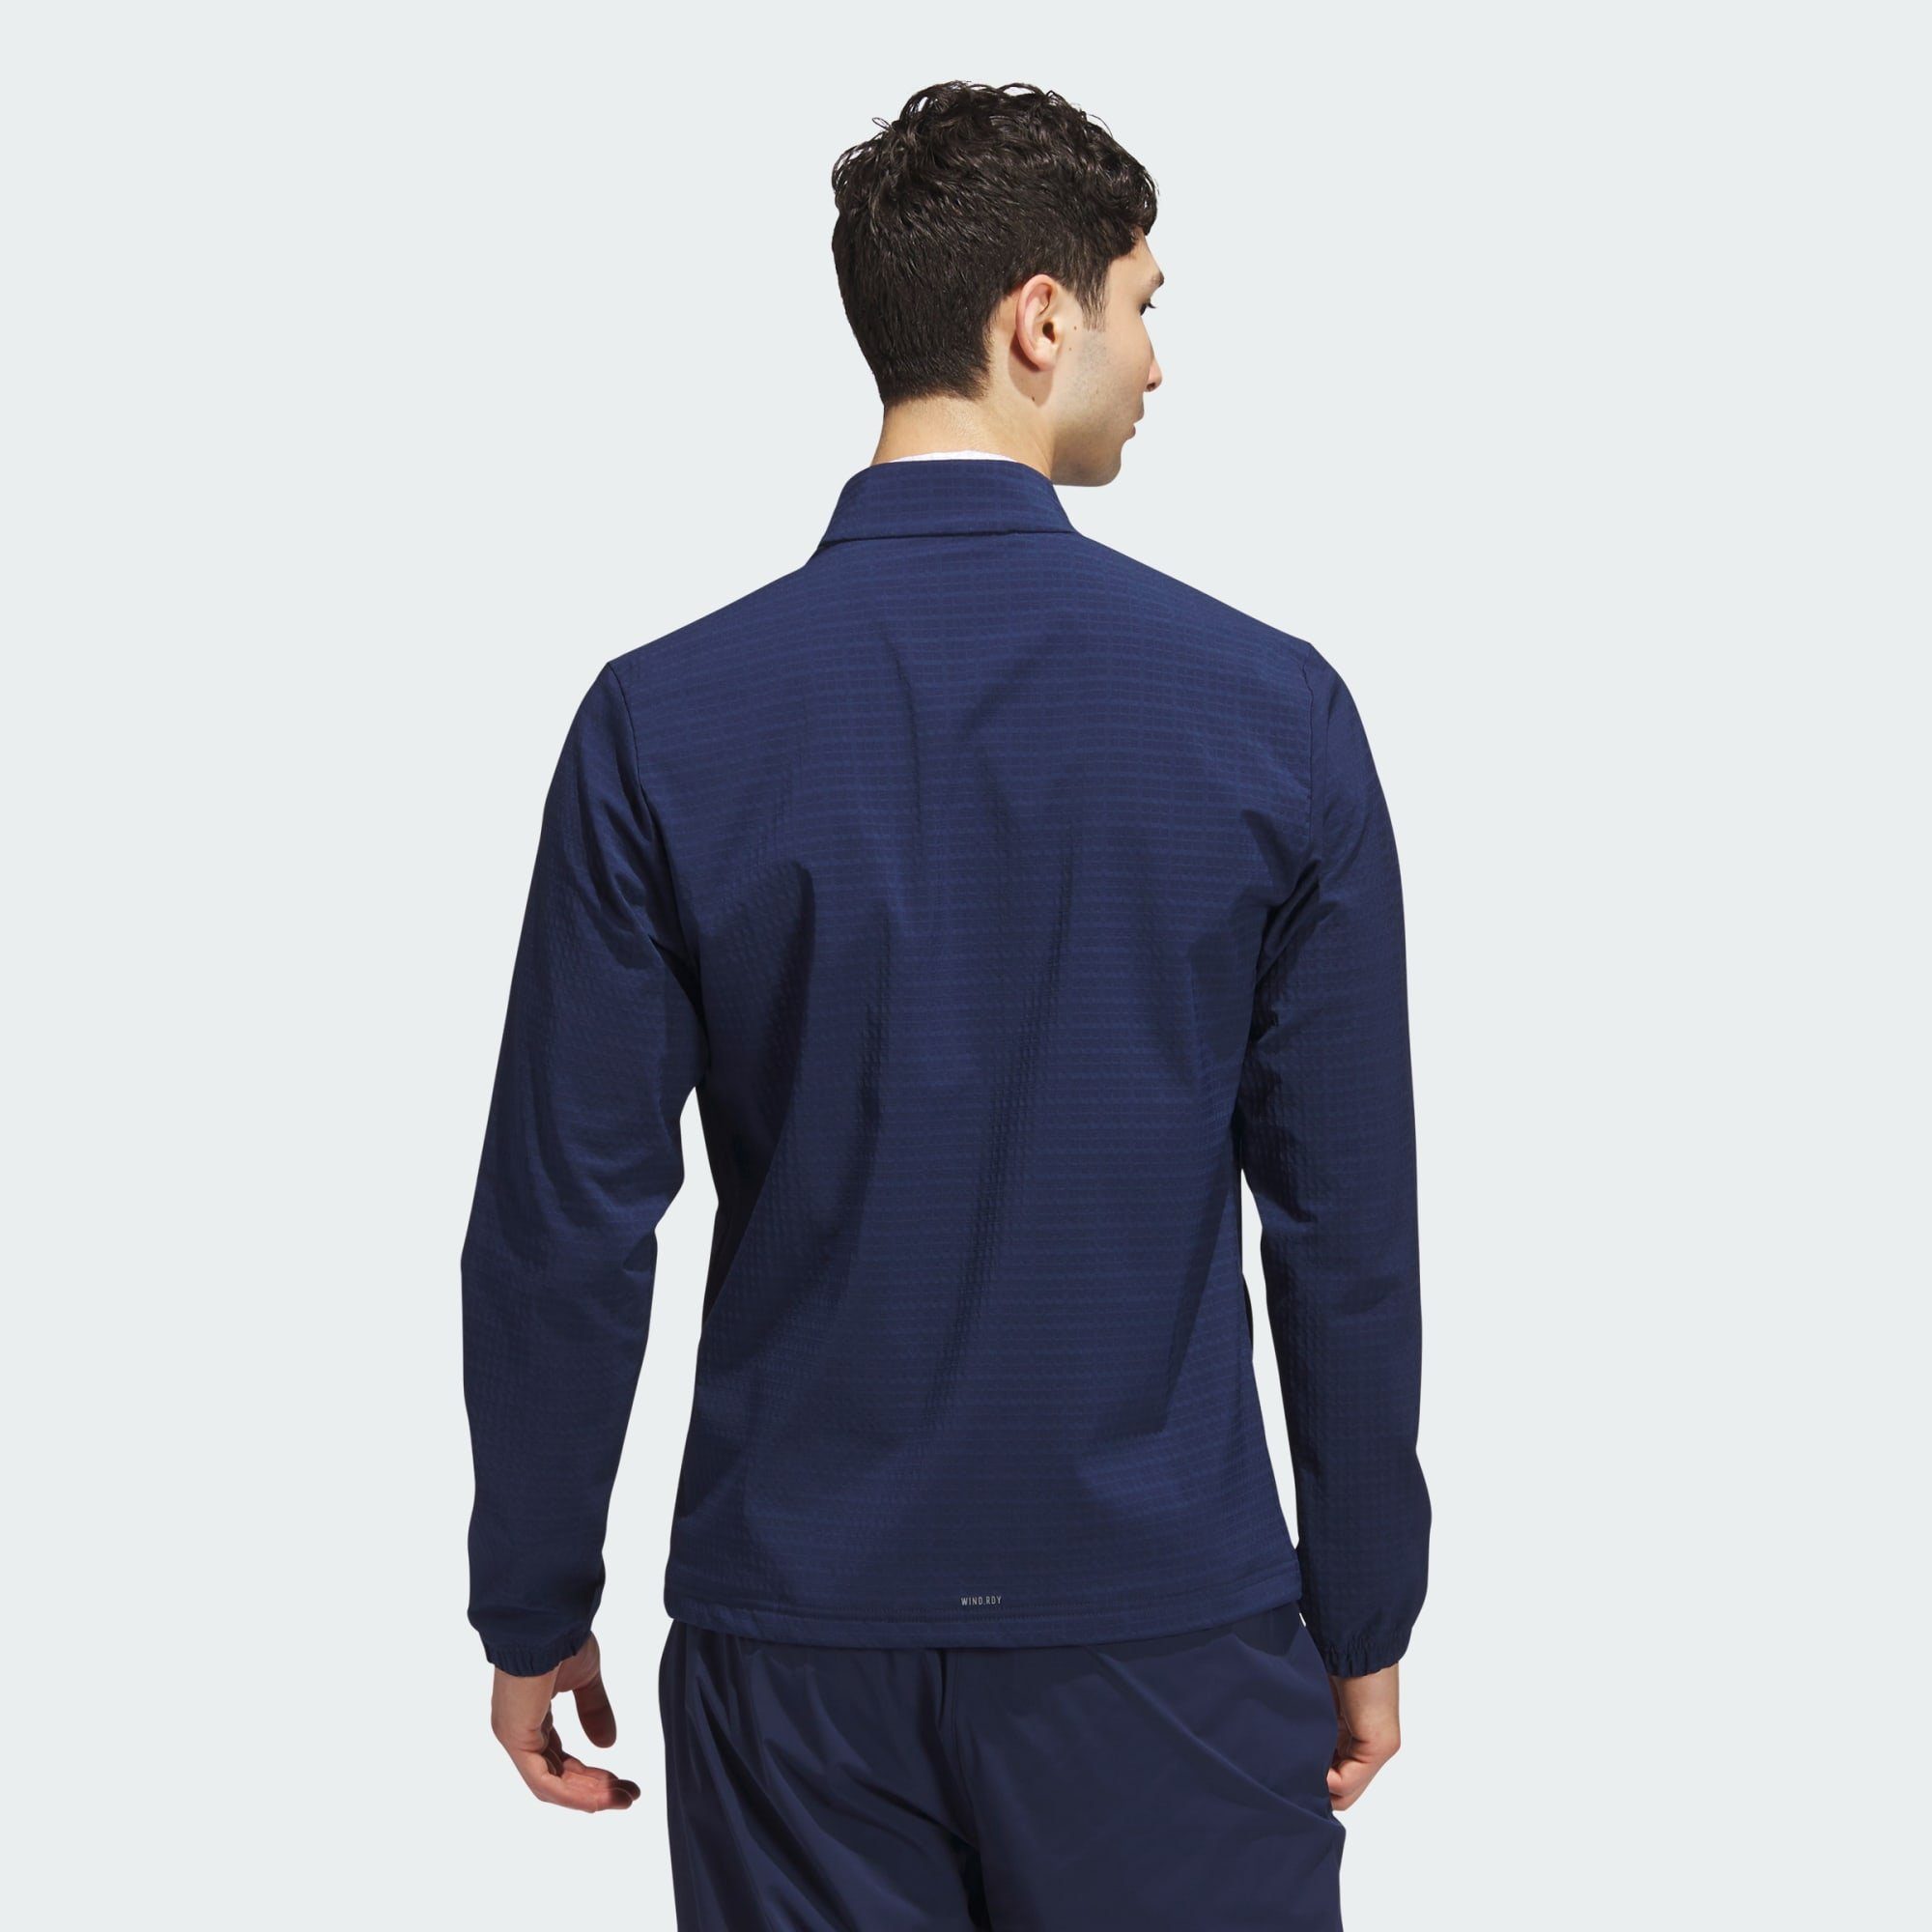 ULTIMATE365 adidas HALF-ZIP Performance WIND.RDY TOUR PULLOVER Funktionsjacke